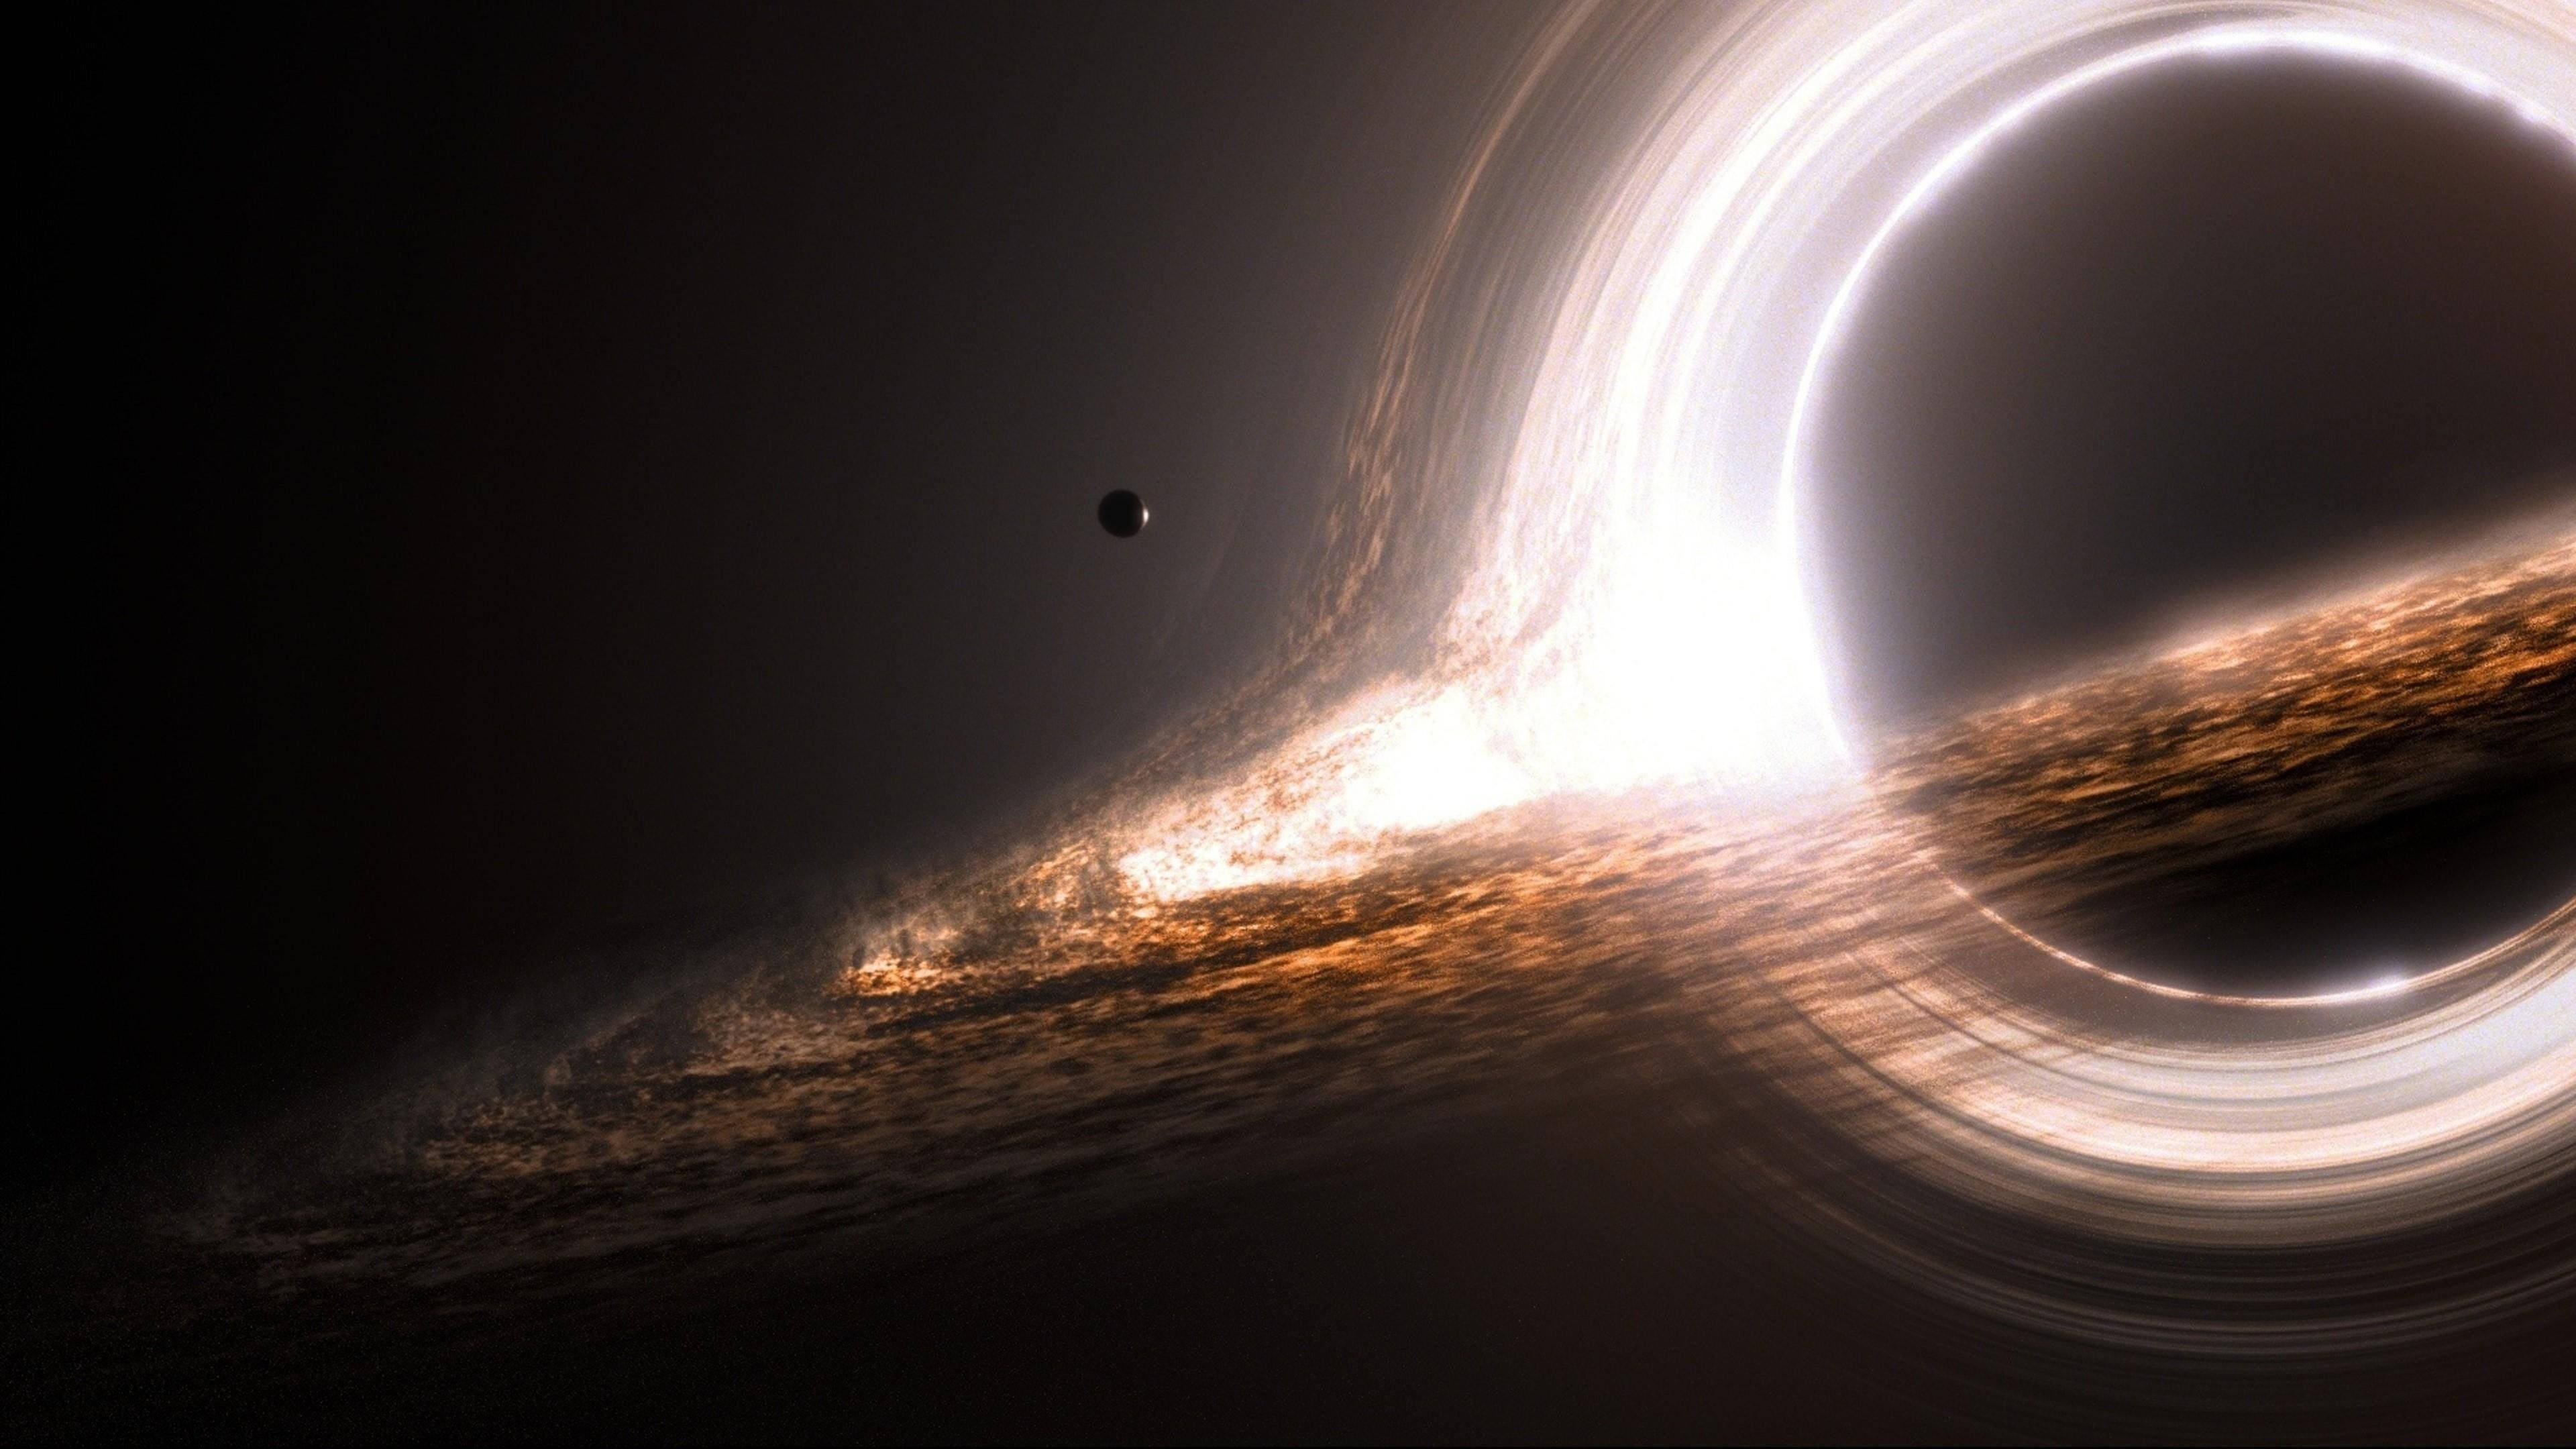 Super Massive Black Hole With Ring Background